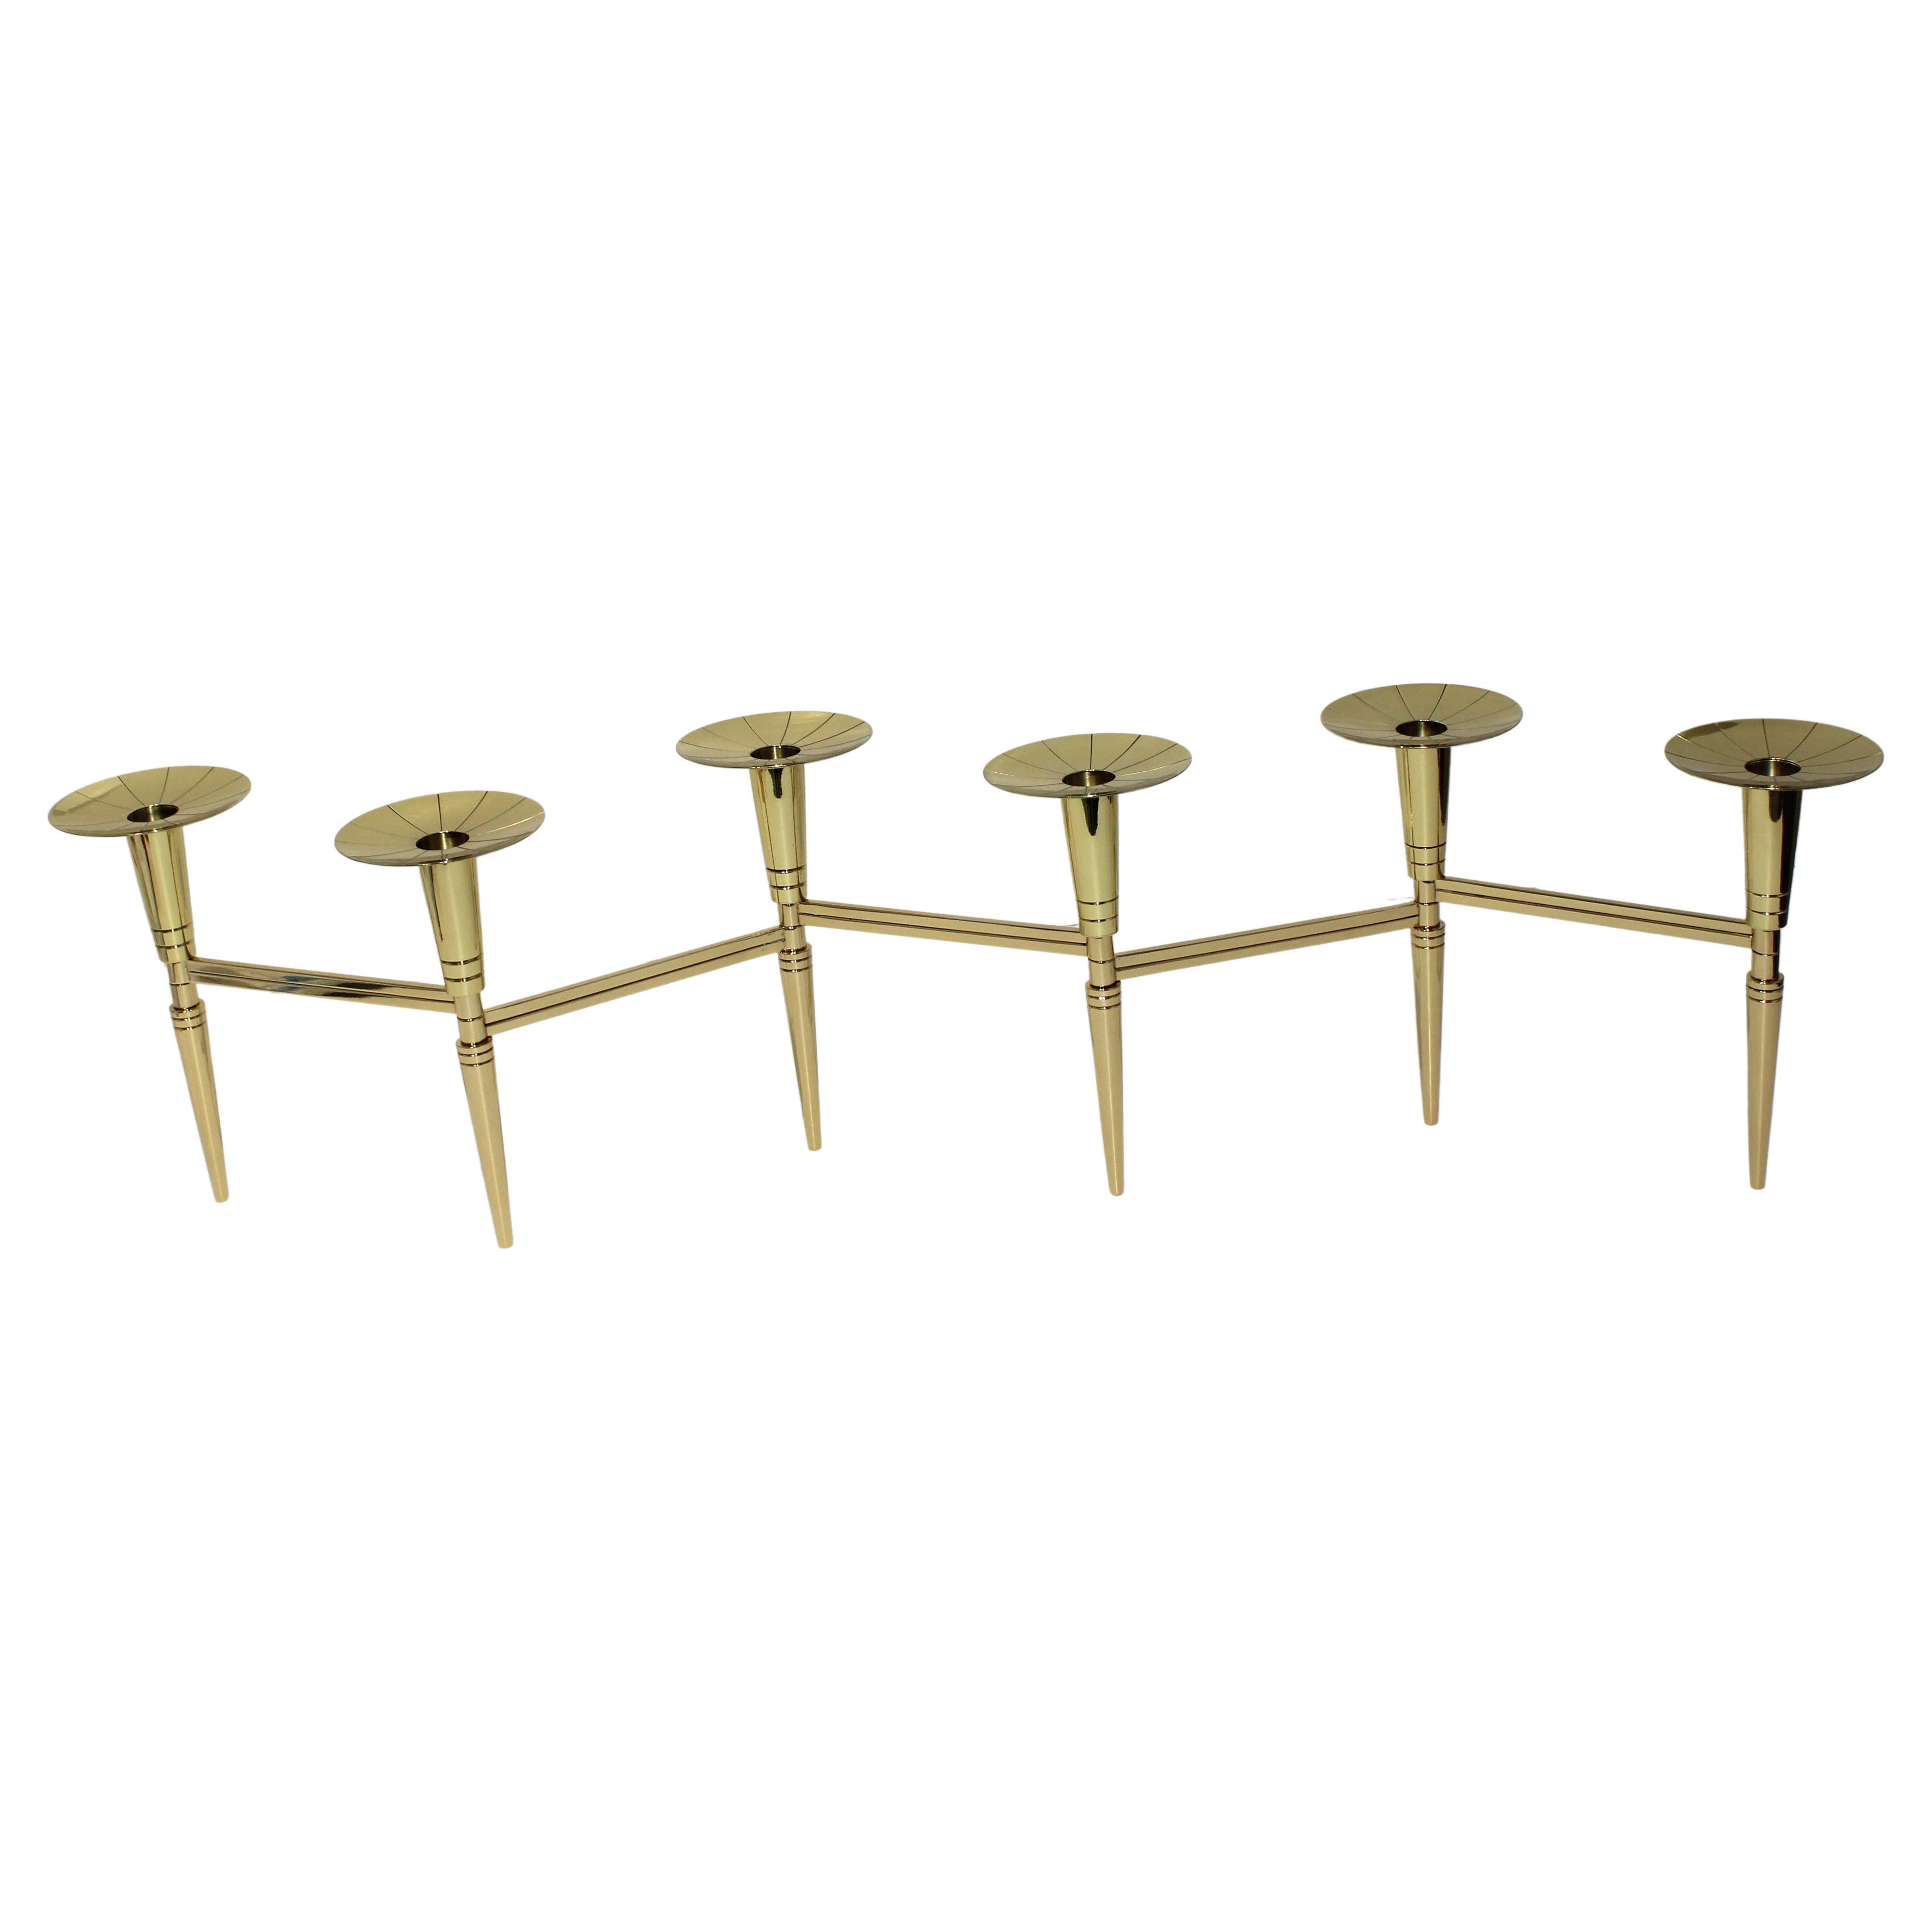 Articulated Brass Candlesticks by Tommi Parzinger